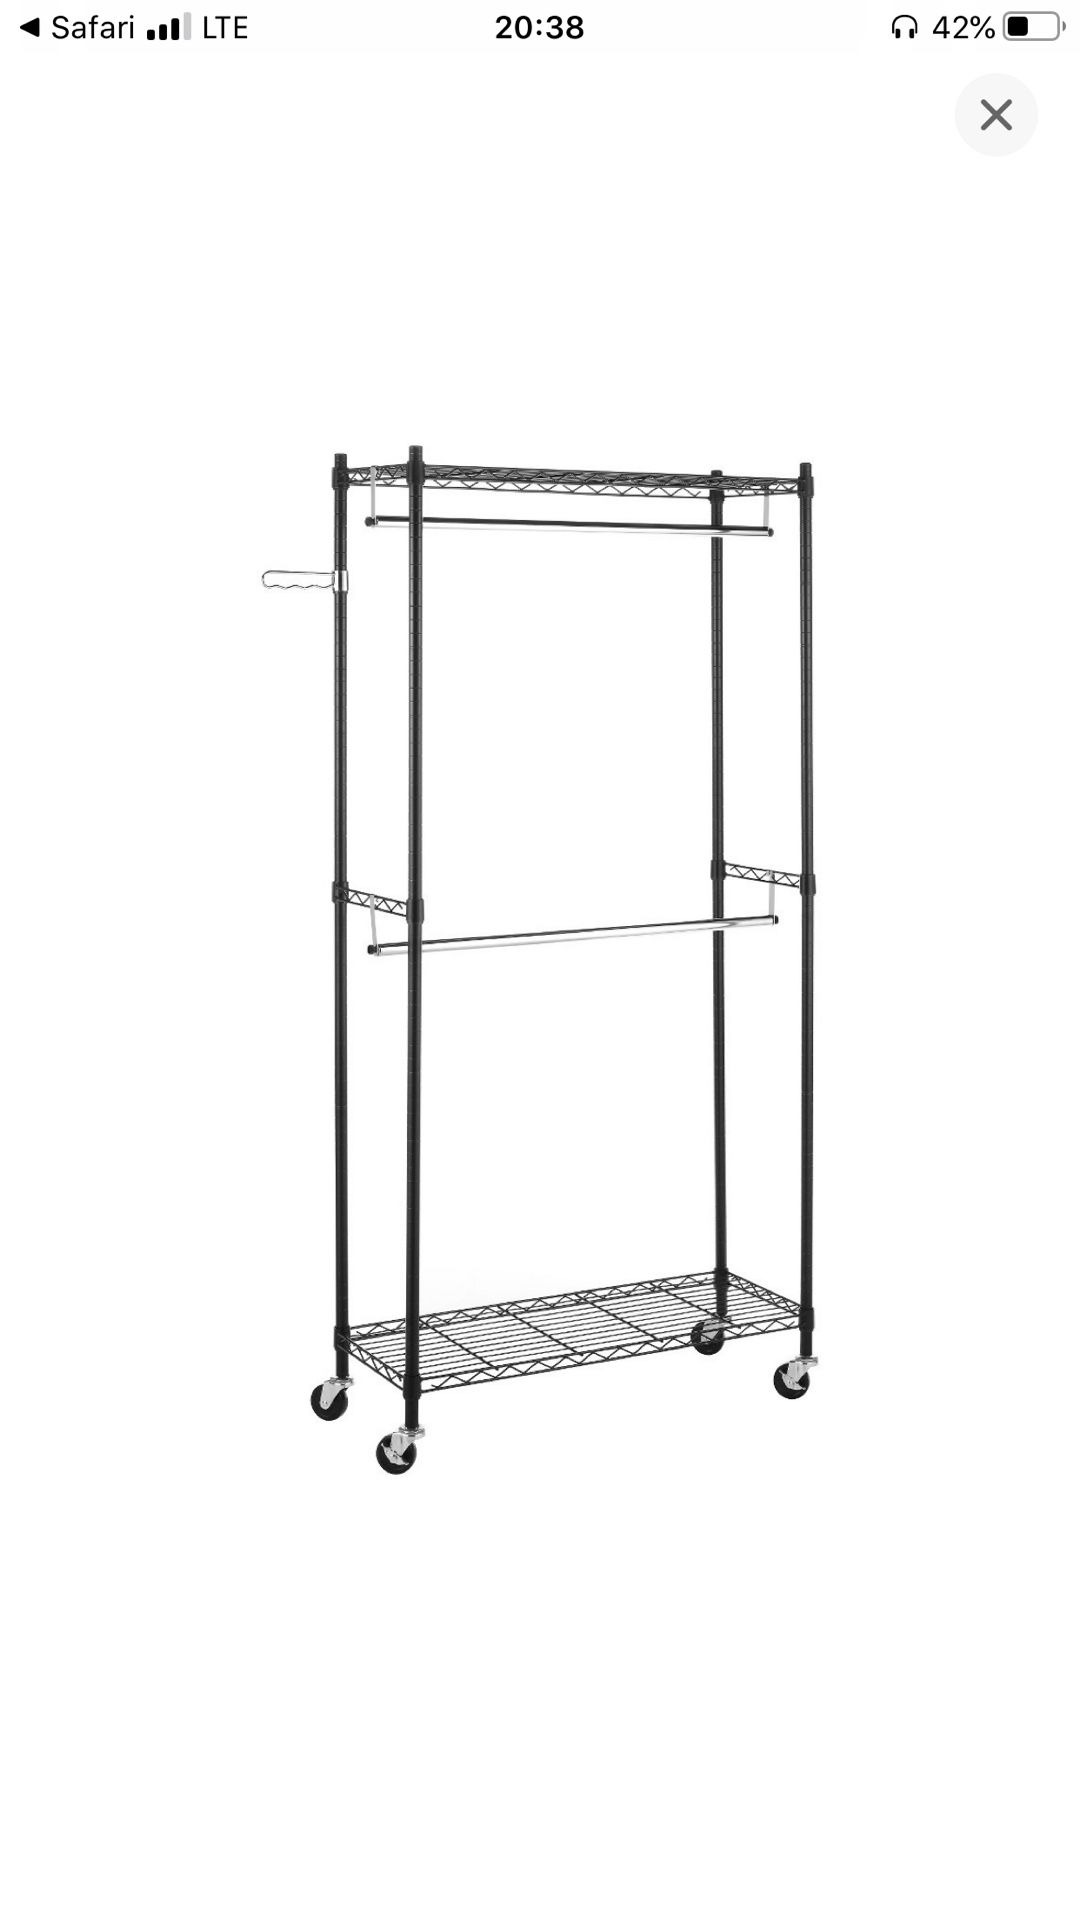 Whitmor Supreme Double Rod Garment Rack Rolling Clothes Organizer - Black with Chrome